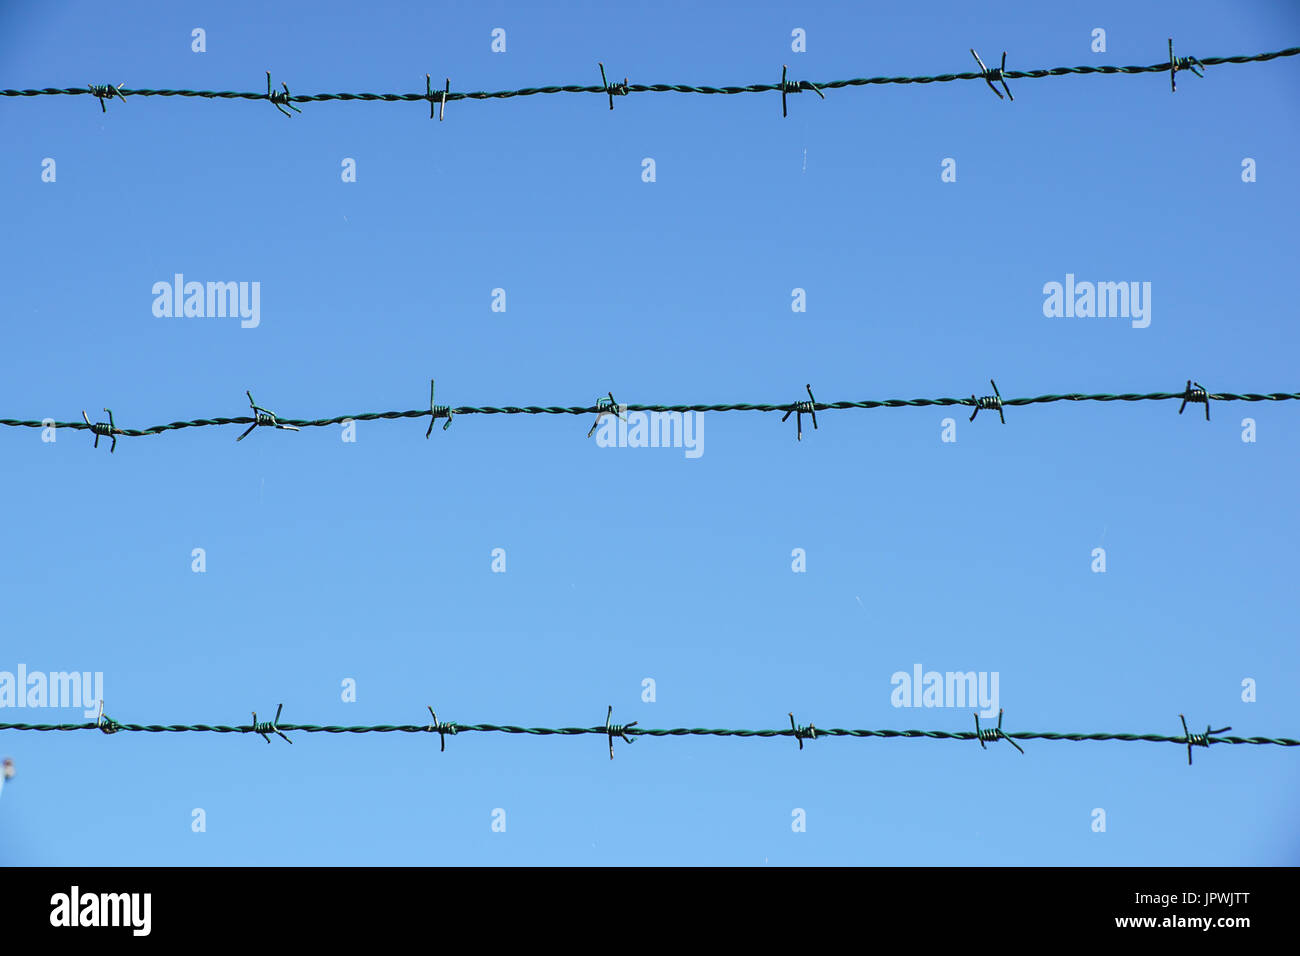 Coiled razor wire with its sharp steel barbs on top of a mesh perimeter fence ensuring safety and security, preventing access or the escape prisoners, Stock Photo